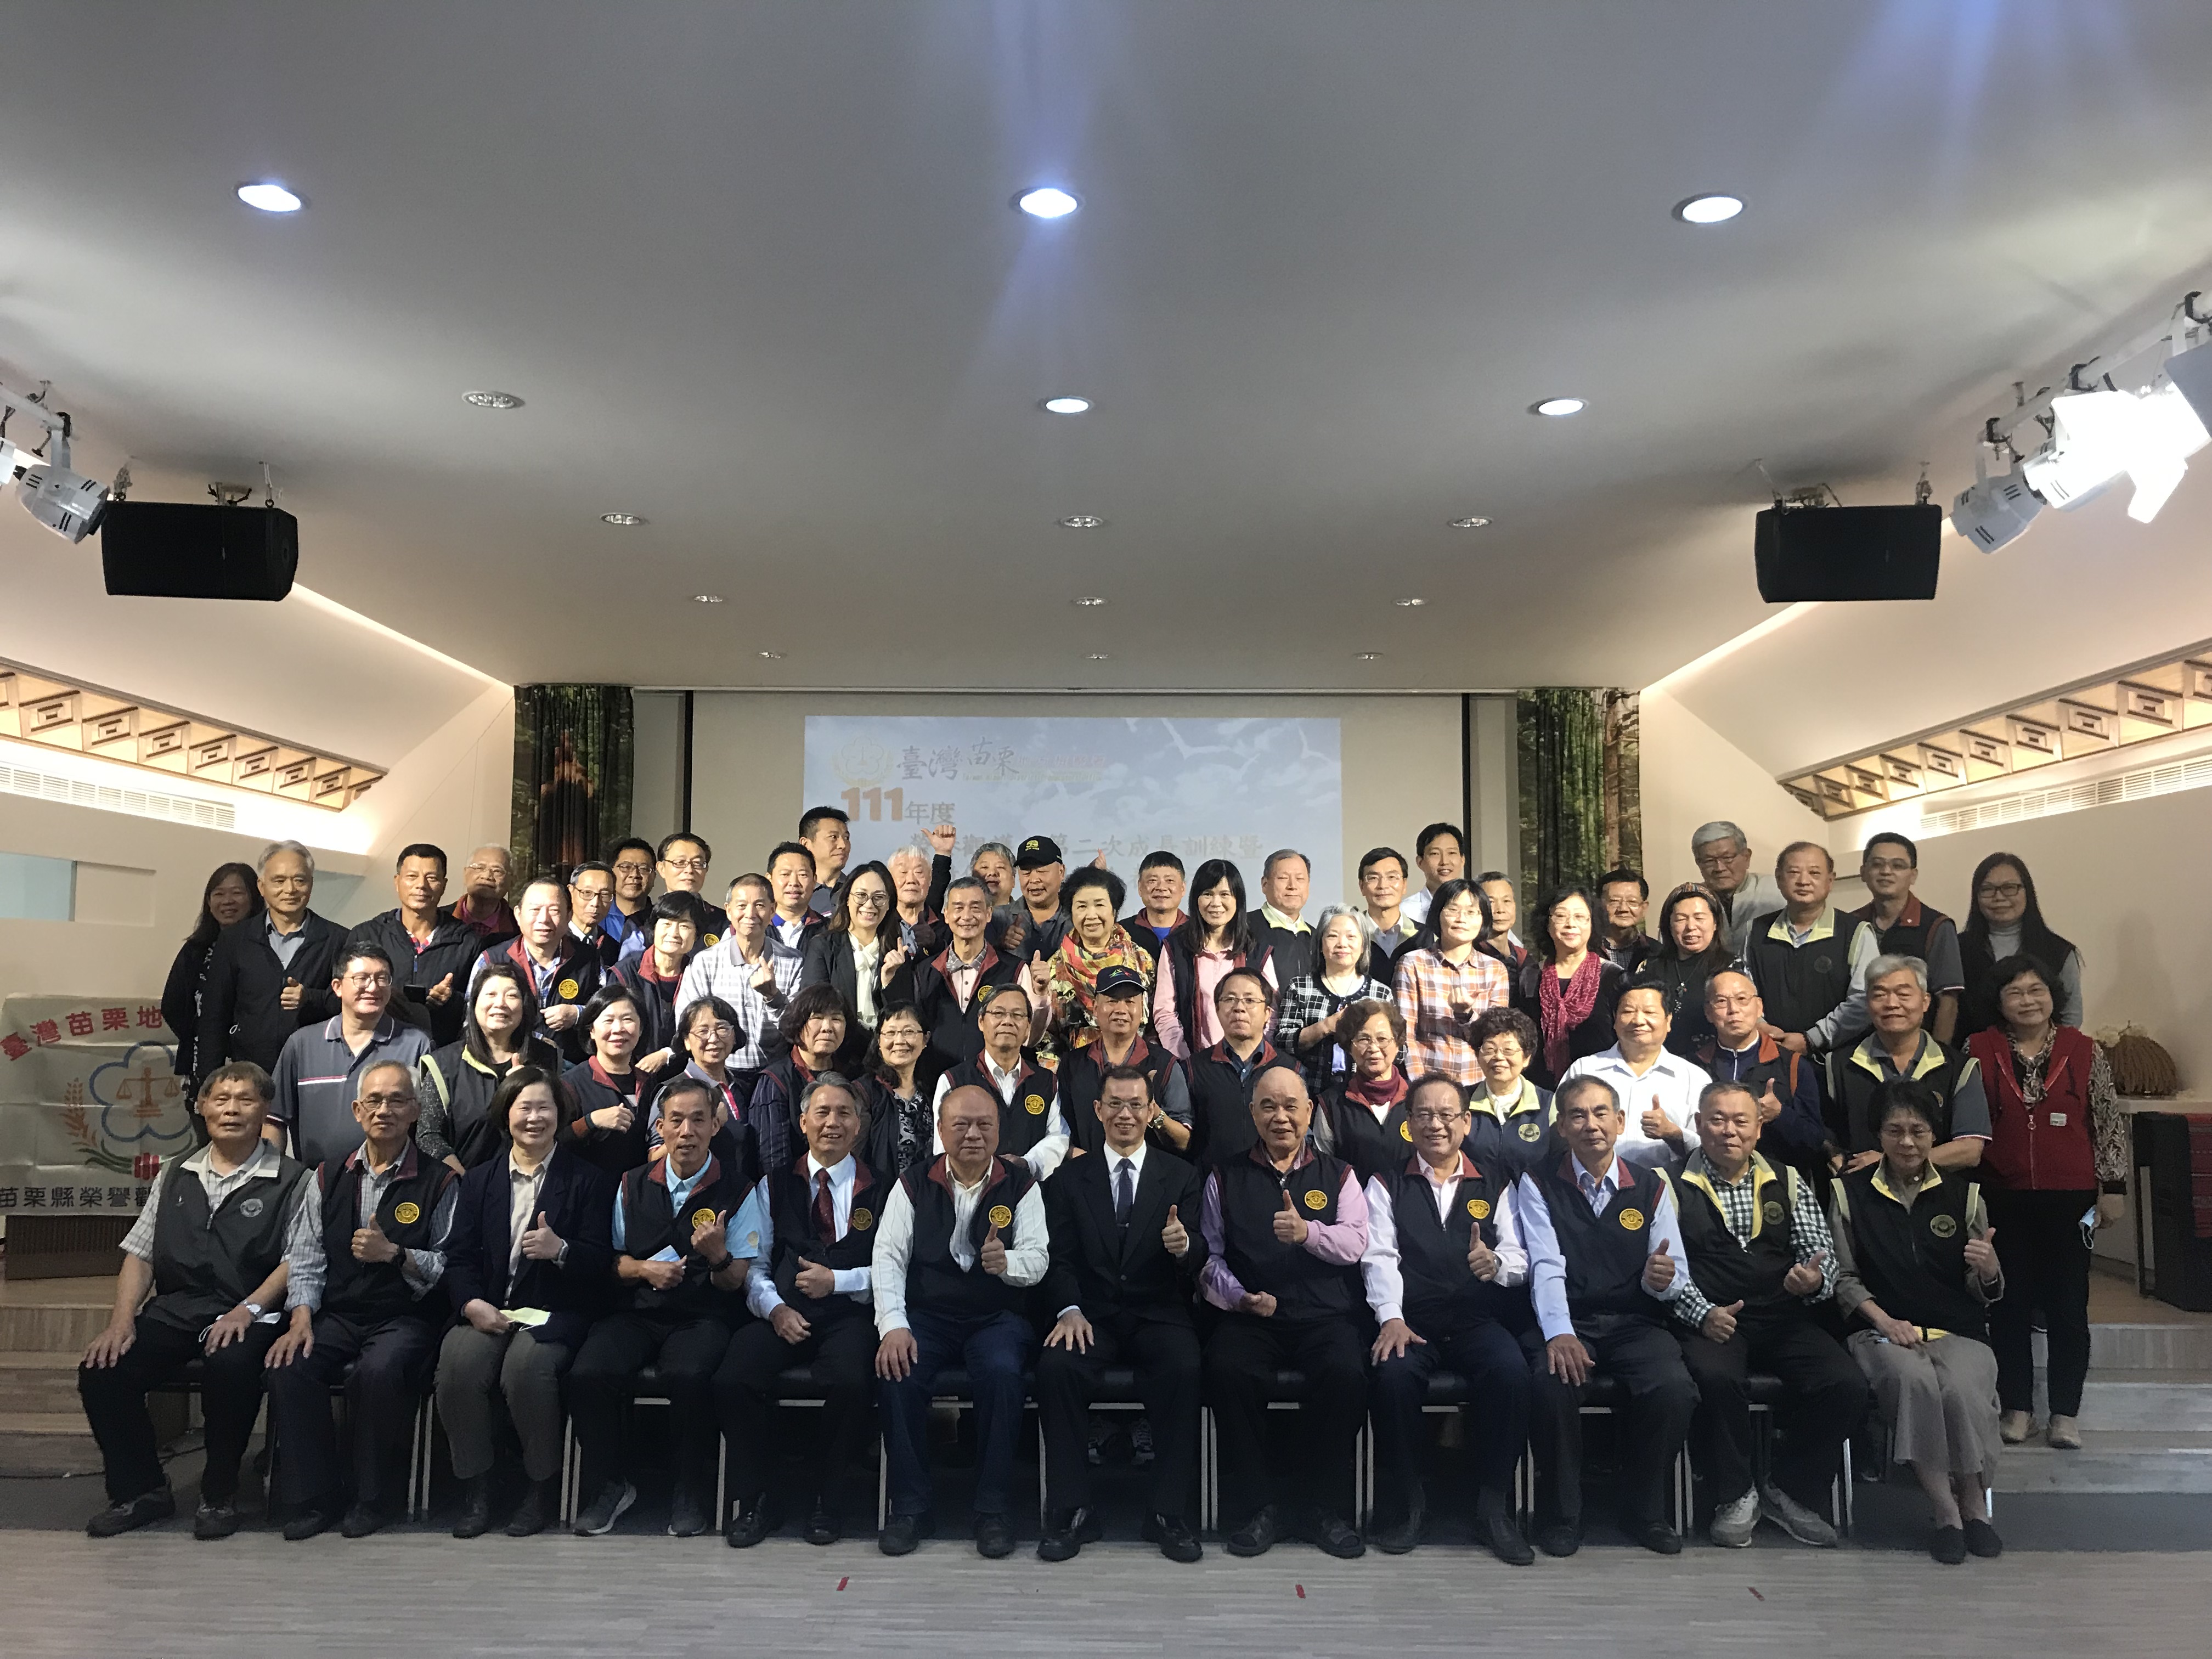 Prosecutor General Chen Songji happily took a photo with all the honorary guardians